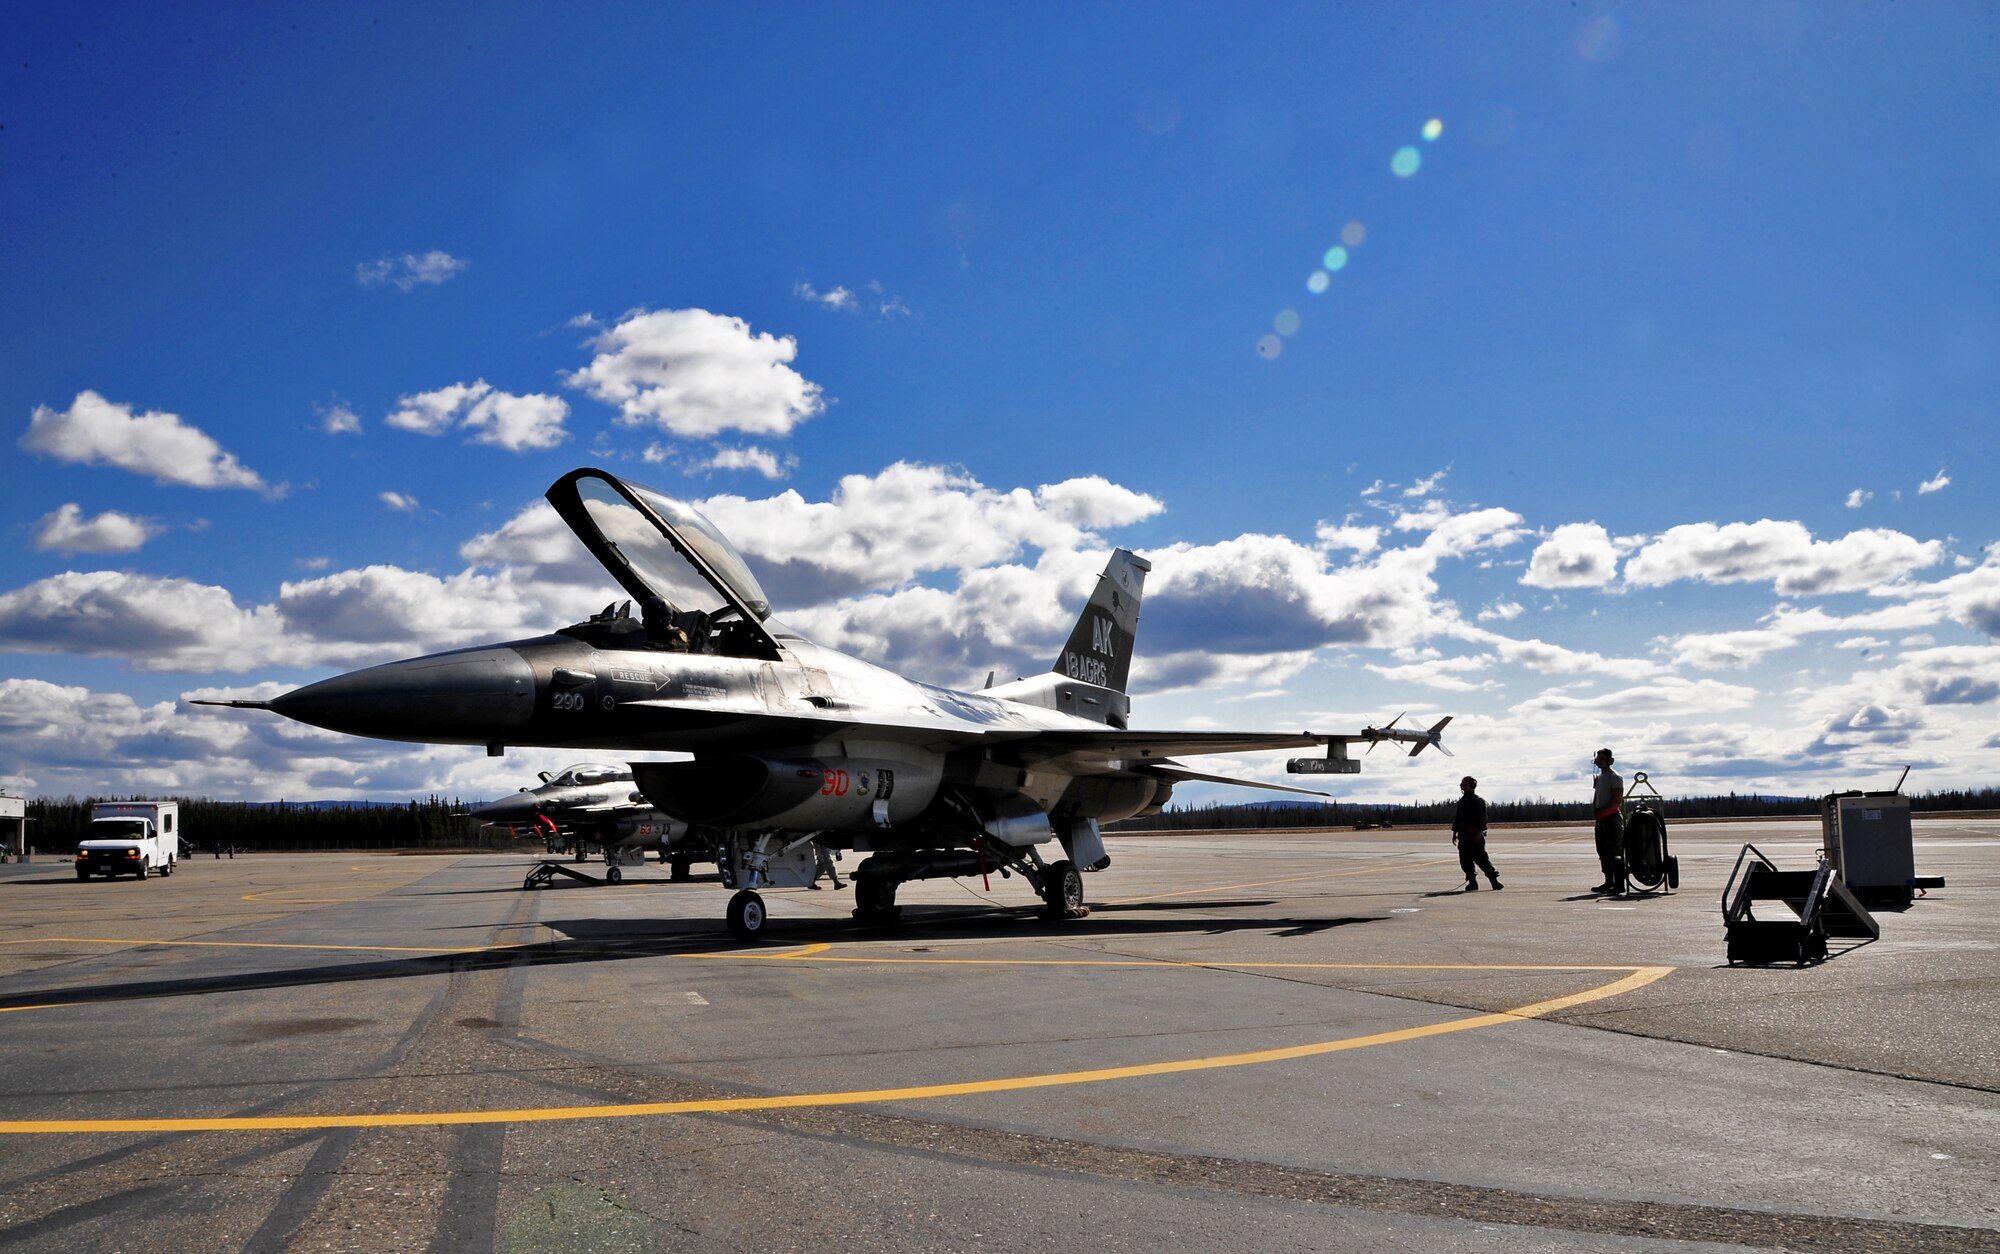 An F-16 Fighting Falcon assigned to the 18th Aggressor Squadron waits to taxi for take-off during Distant Frontier at Eielson Air Force Base, Alaska, April 28, 2015.  Aggressor pilots are trained to act as opposing forces in RED FLAG-Alaska to prepare U.S. and allied forces for real-world aerial combat. (U.S. Air Force photo by Tech. Sgt. Miguel Lara III/Released)